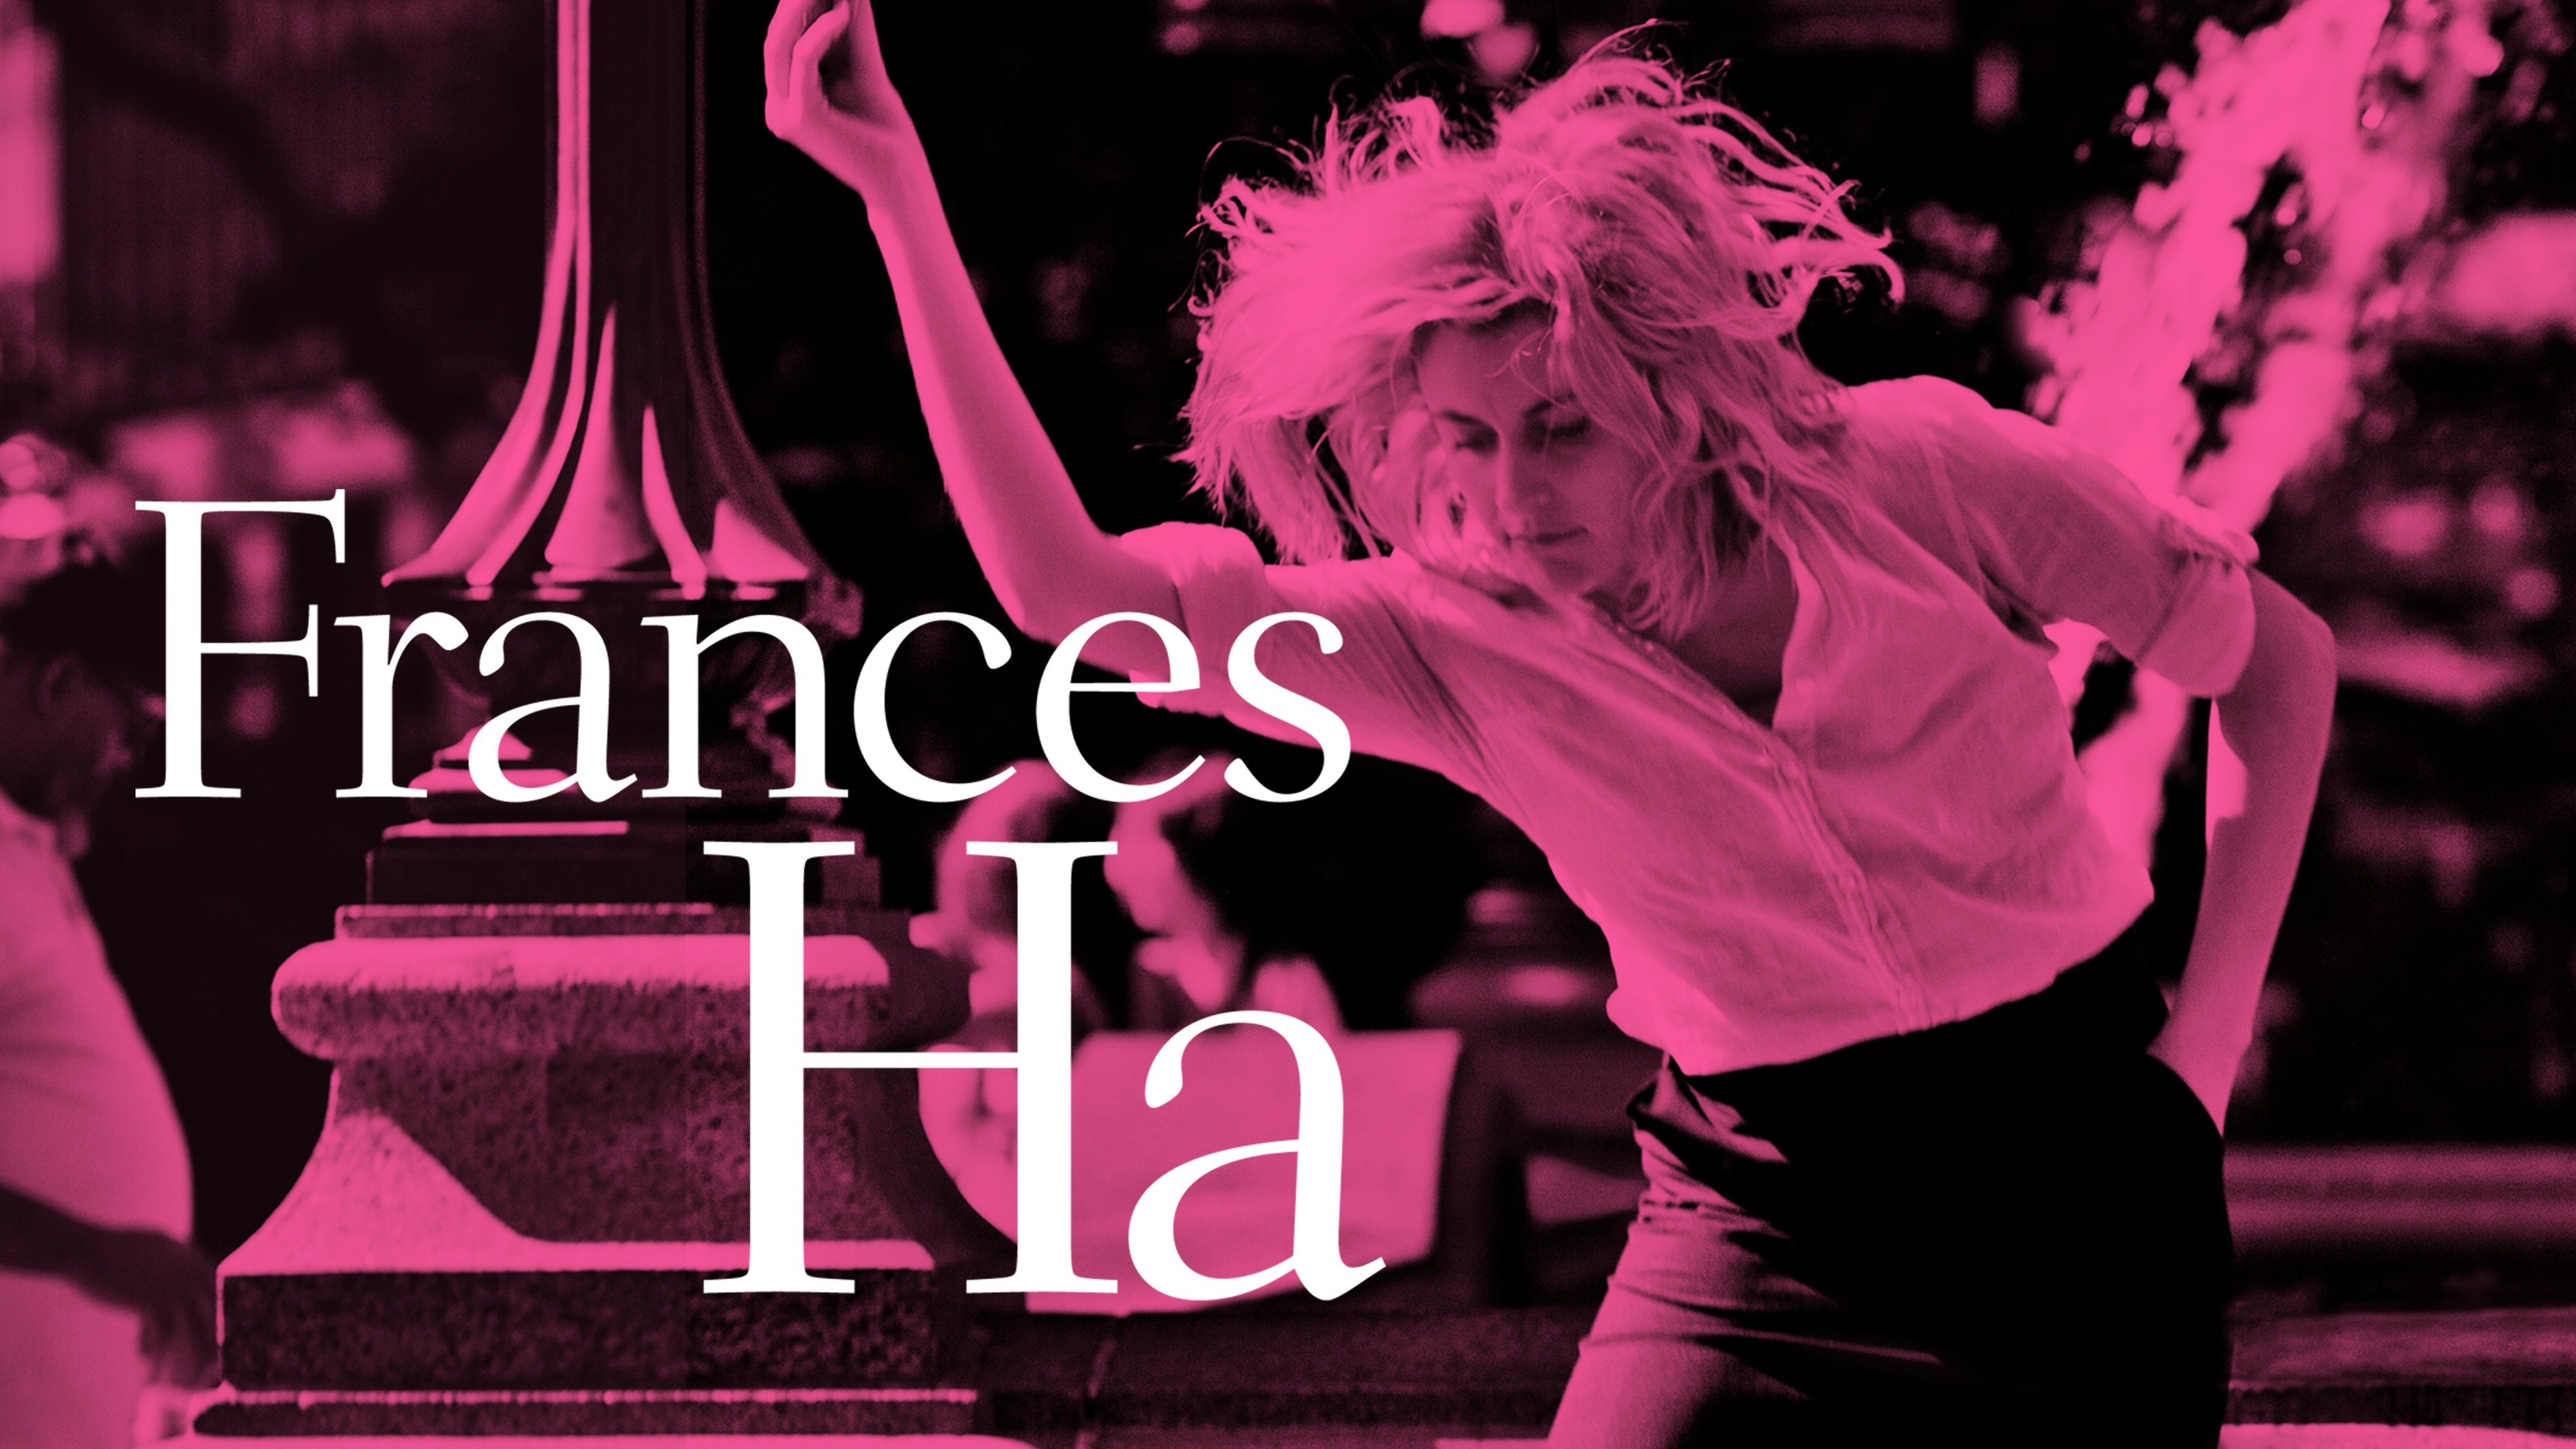 39-facts-about-the-movie-frances-ha